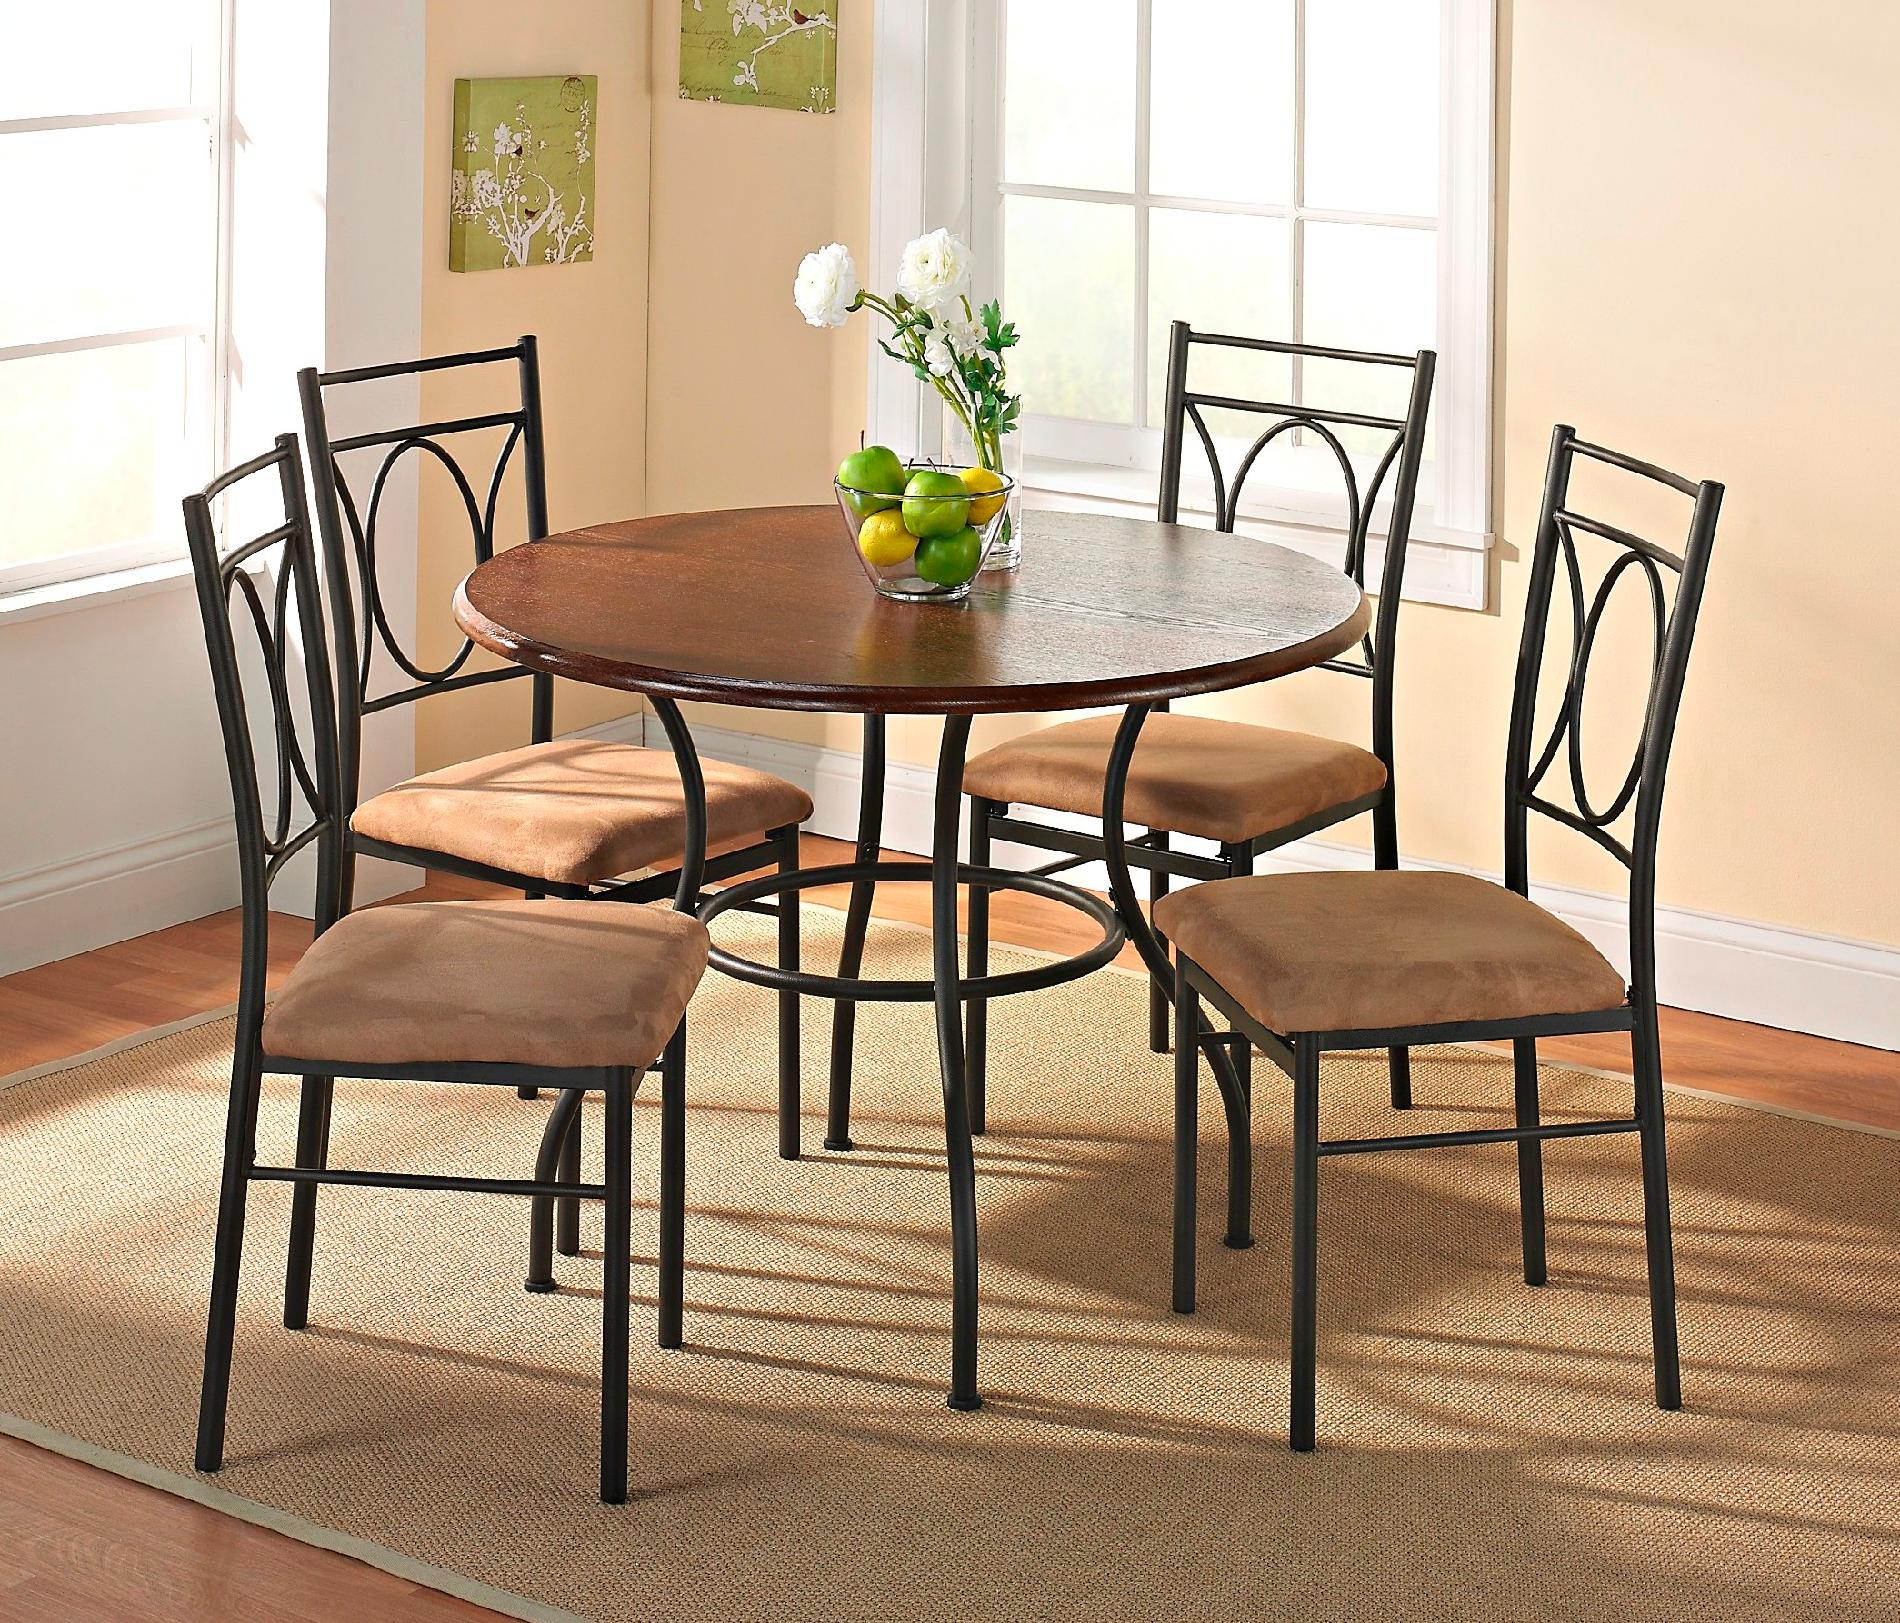 Asdrs50 Apartment Size Dining Room Set Today 2021 01 23